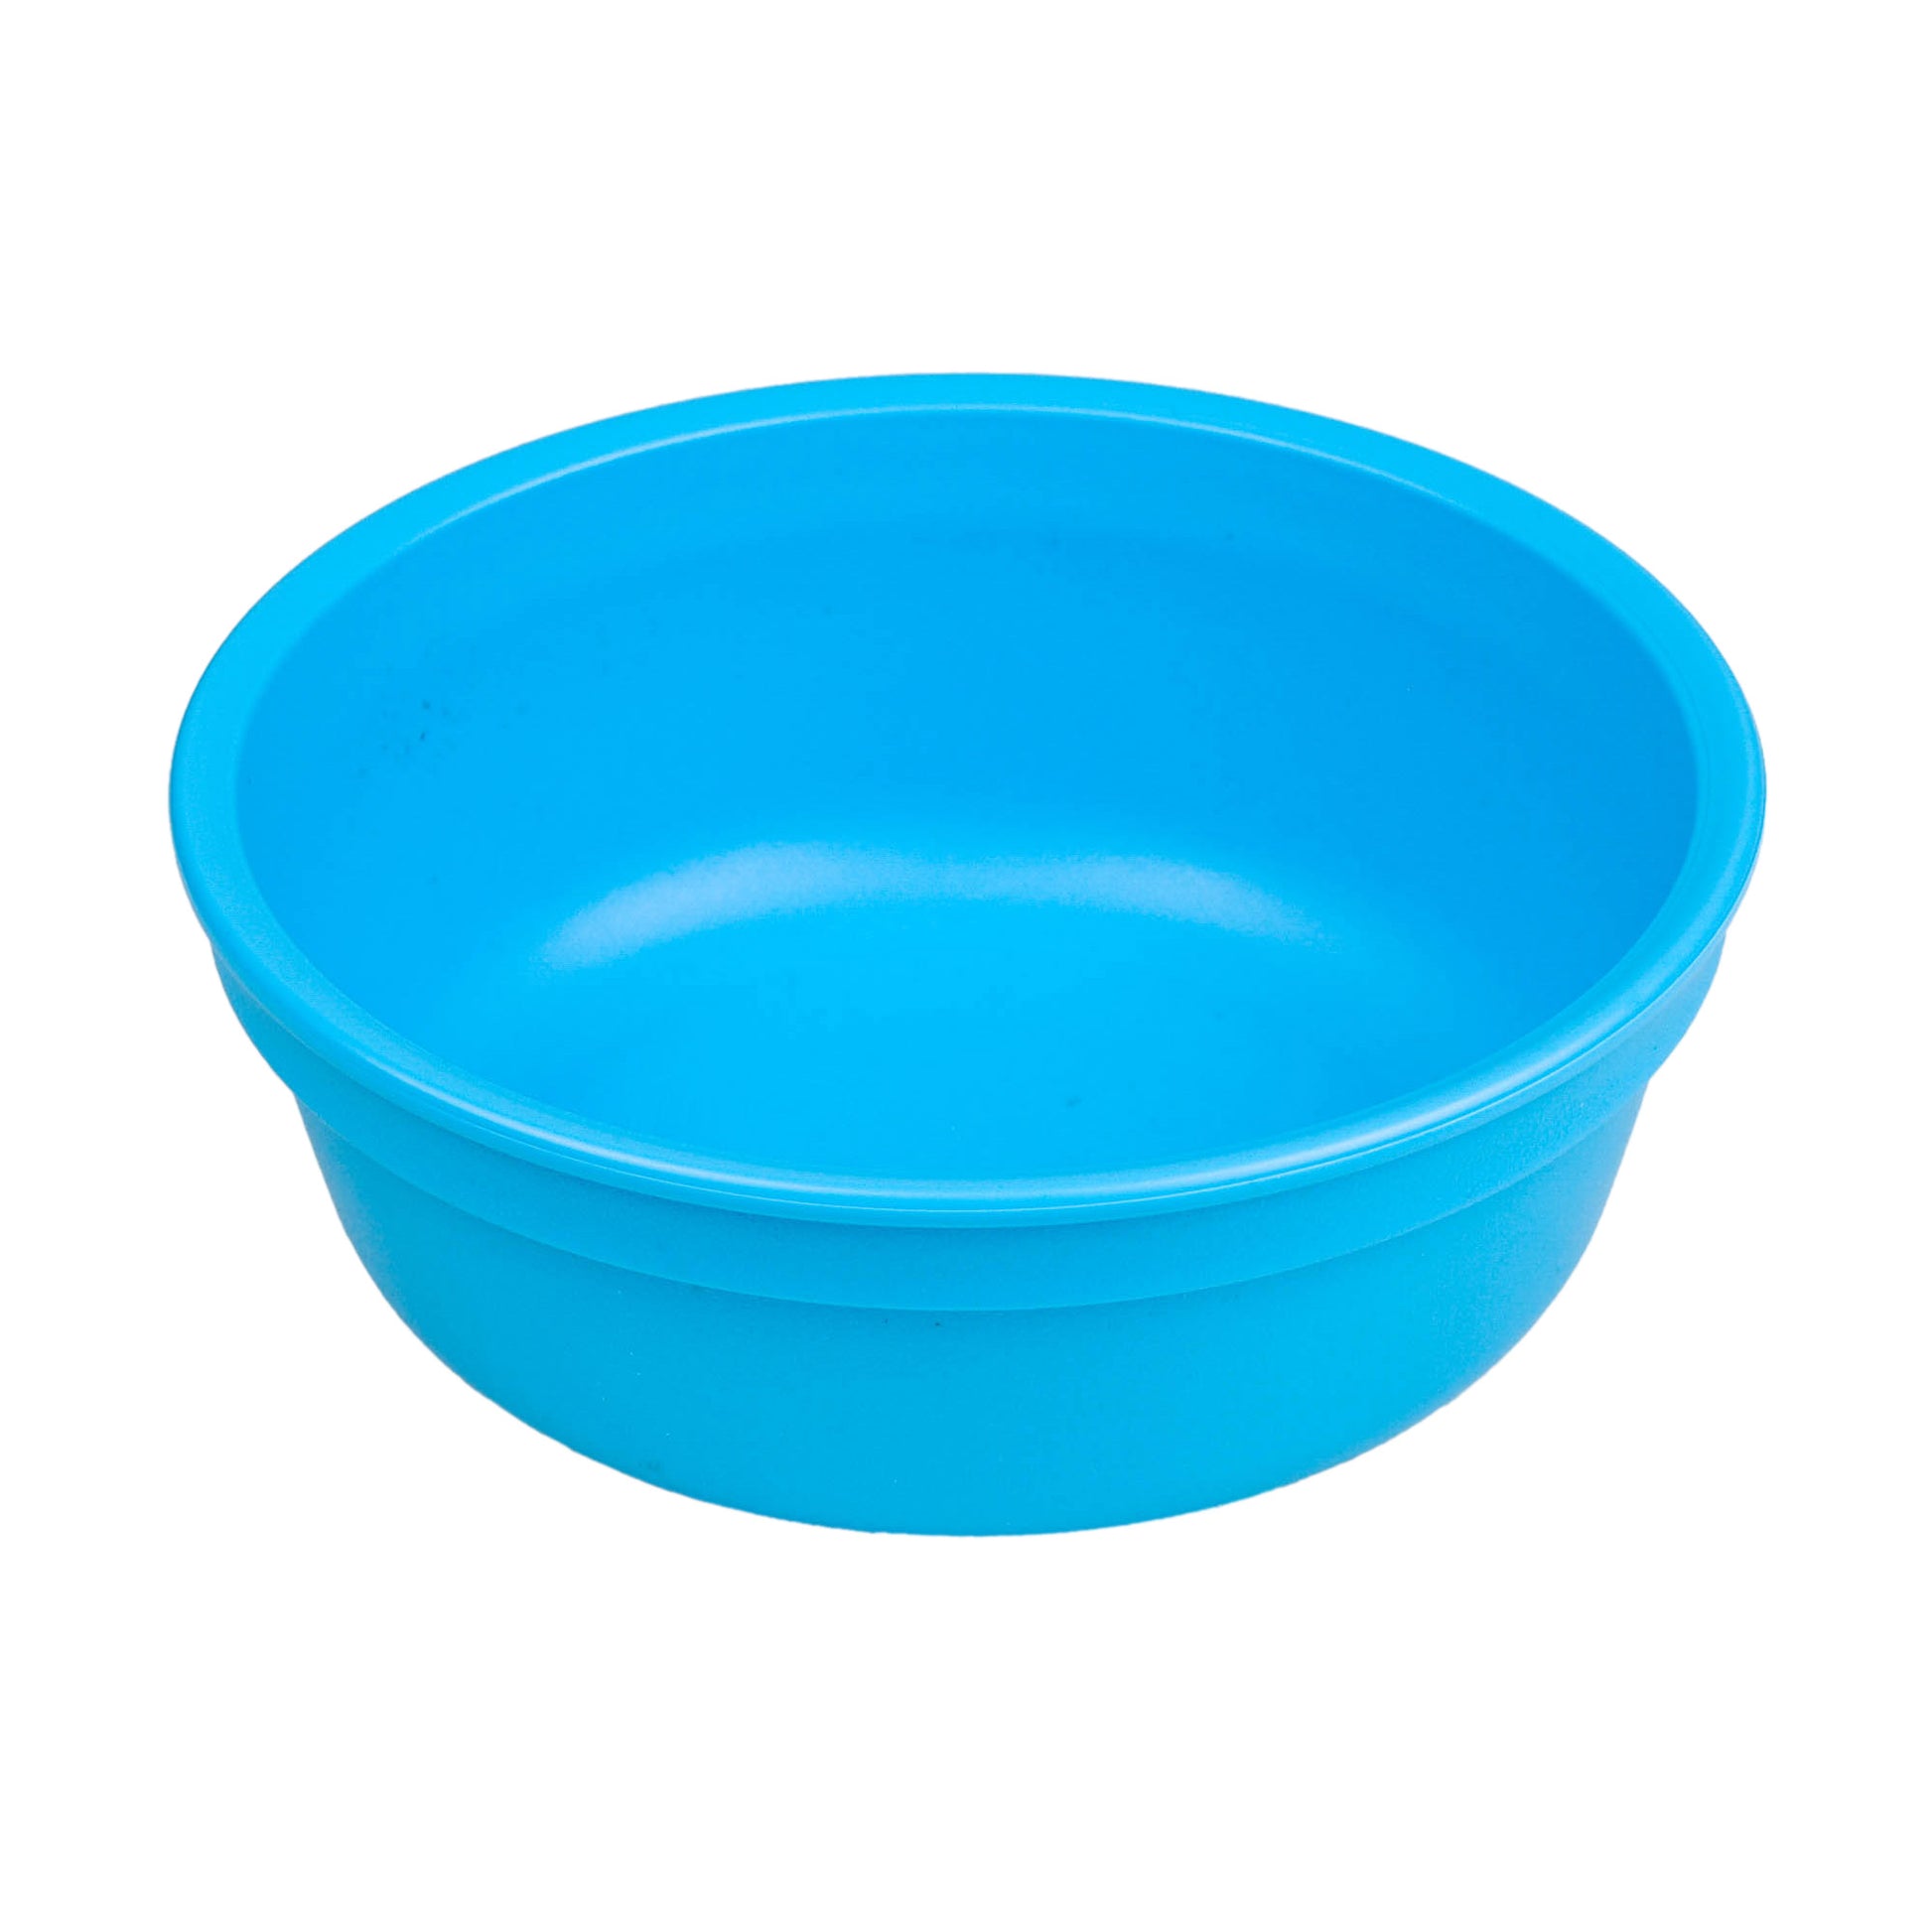 Re-Play Bowl | Standard Size in Sky Blue from Bear & Moo